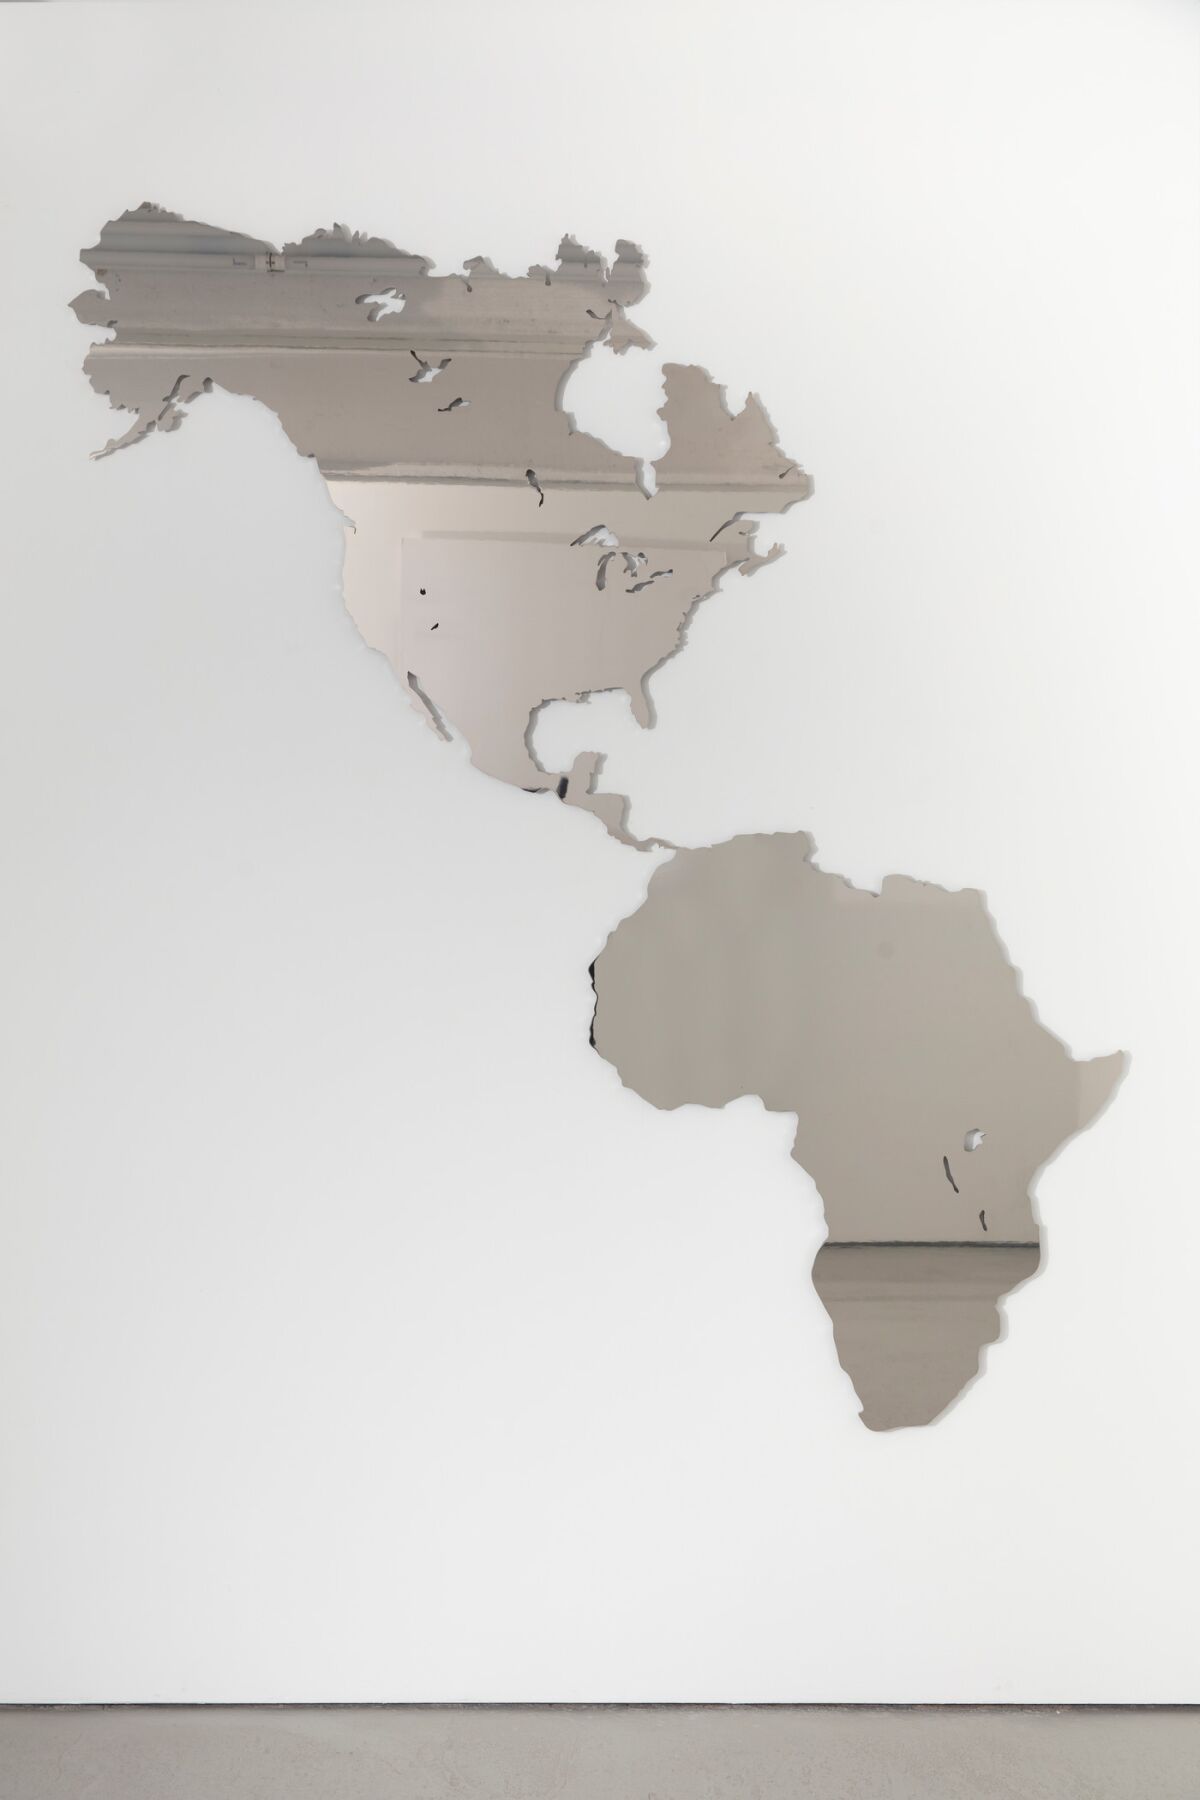 Mirror cutout of the americas with South America being the shape of Africa, 